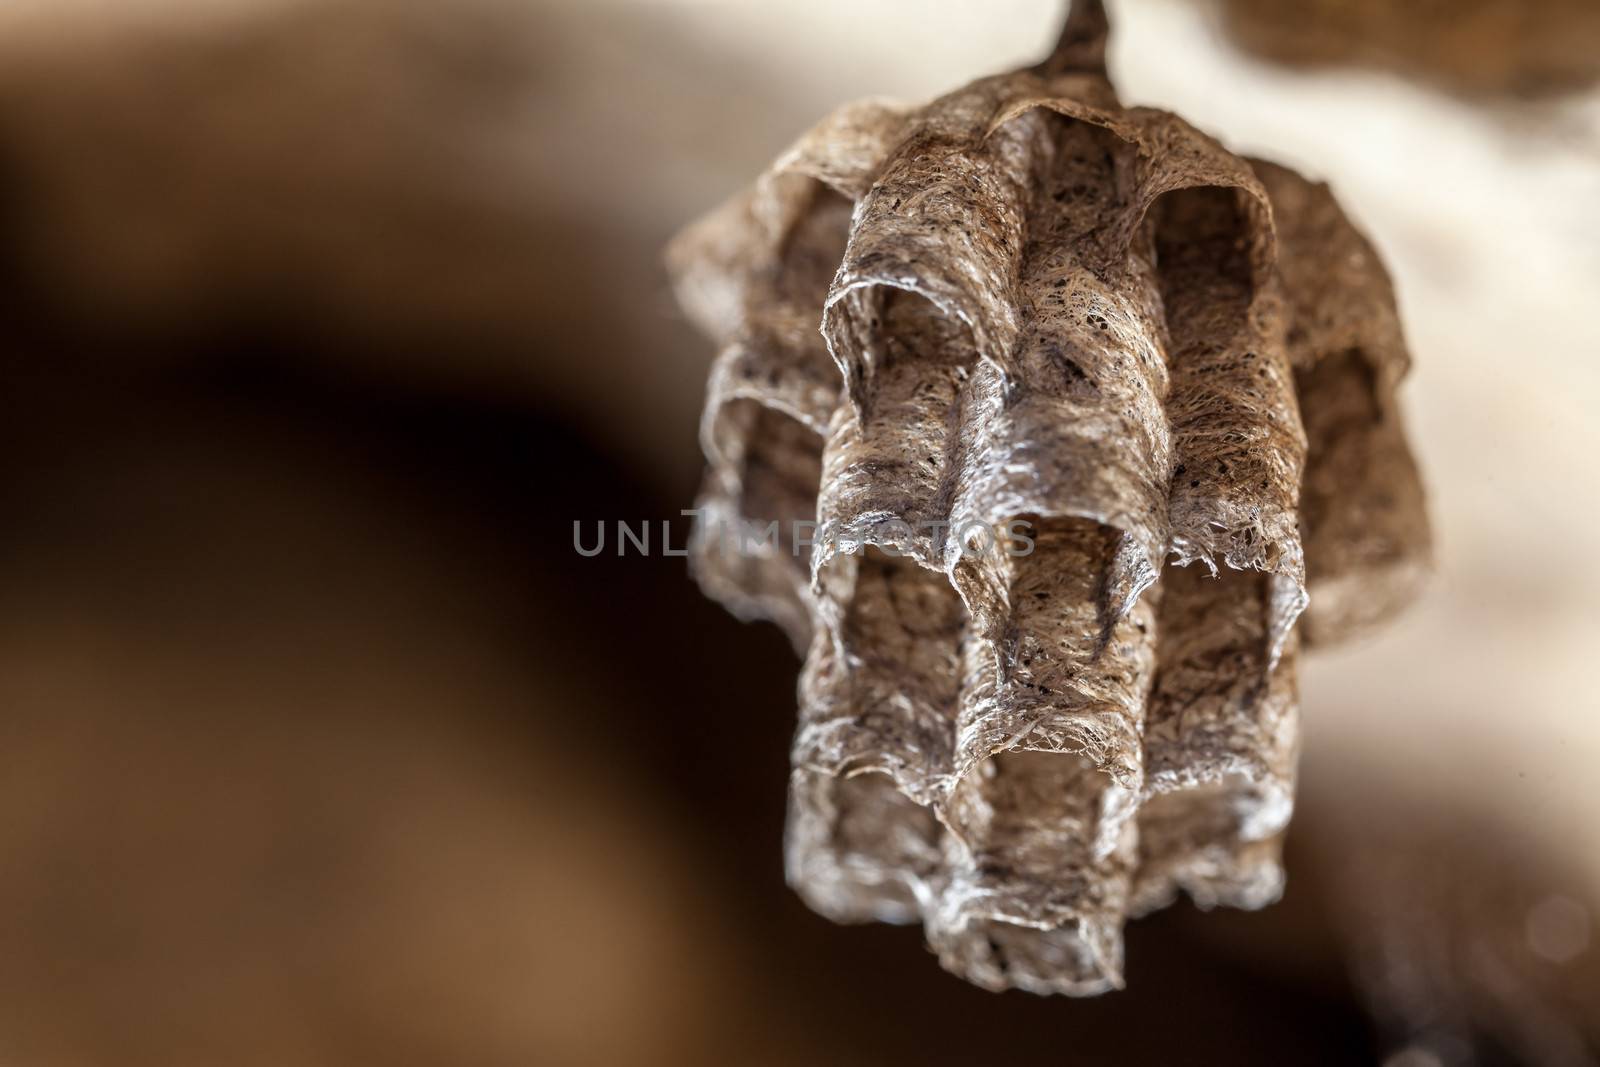 Paper Wasp Nest by PhotoWorks